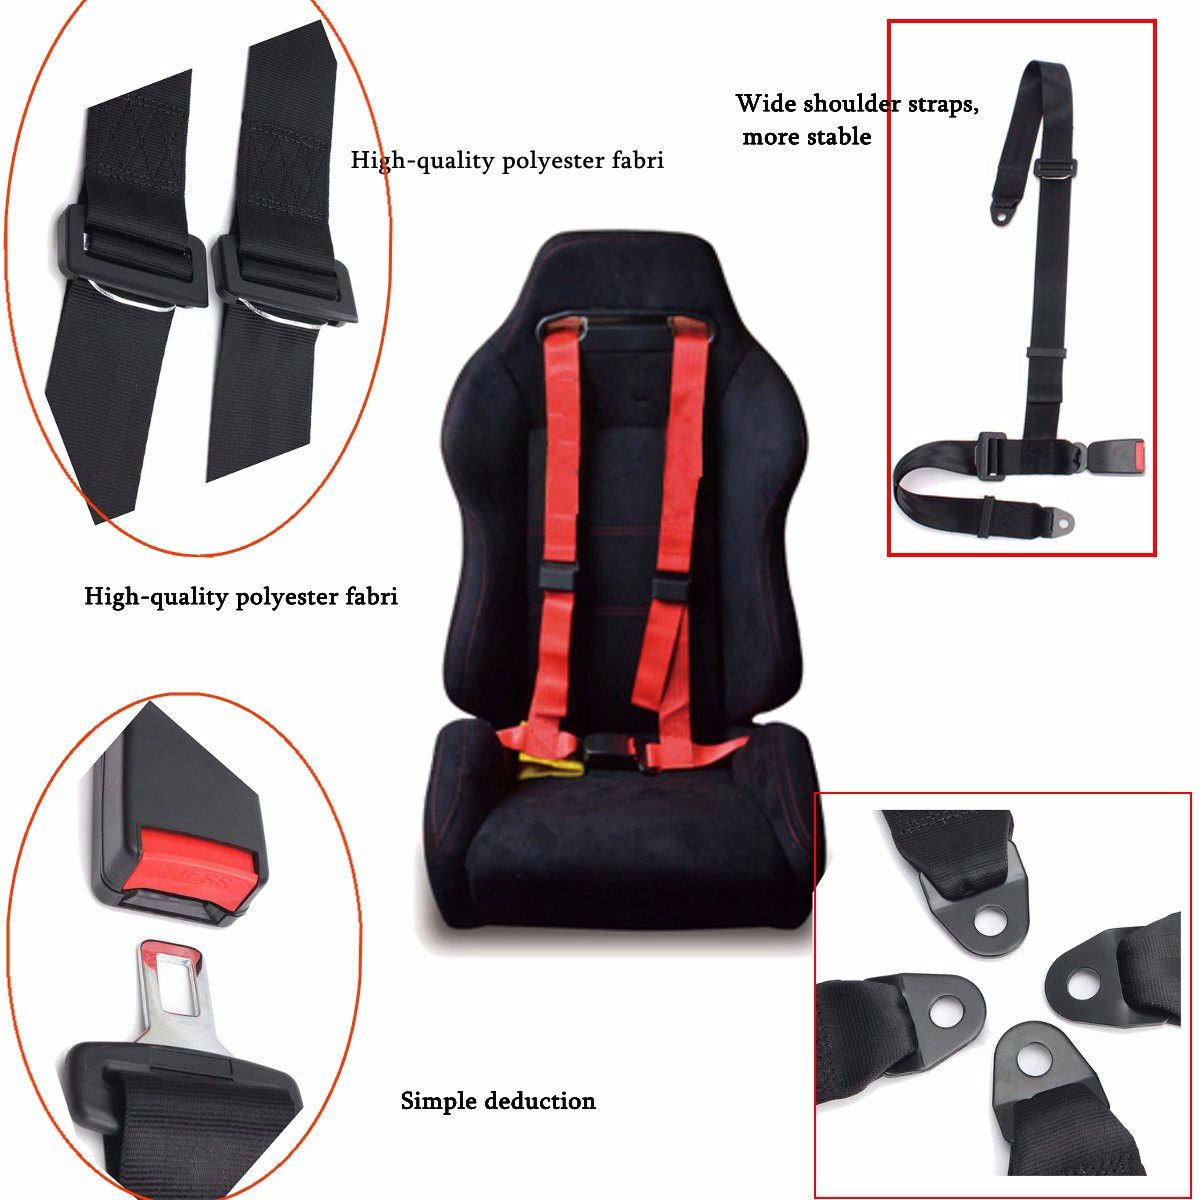 Sport-Racing-Car-Harness-Safety-Seat-Belt-3-4-Point-Fixing-Mounting-Quick-Release-1092163